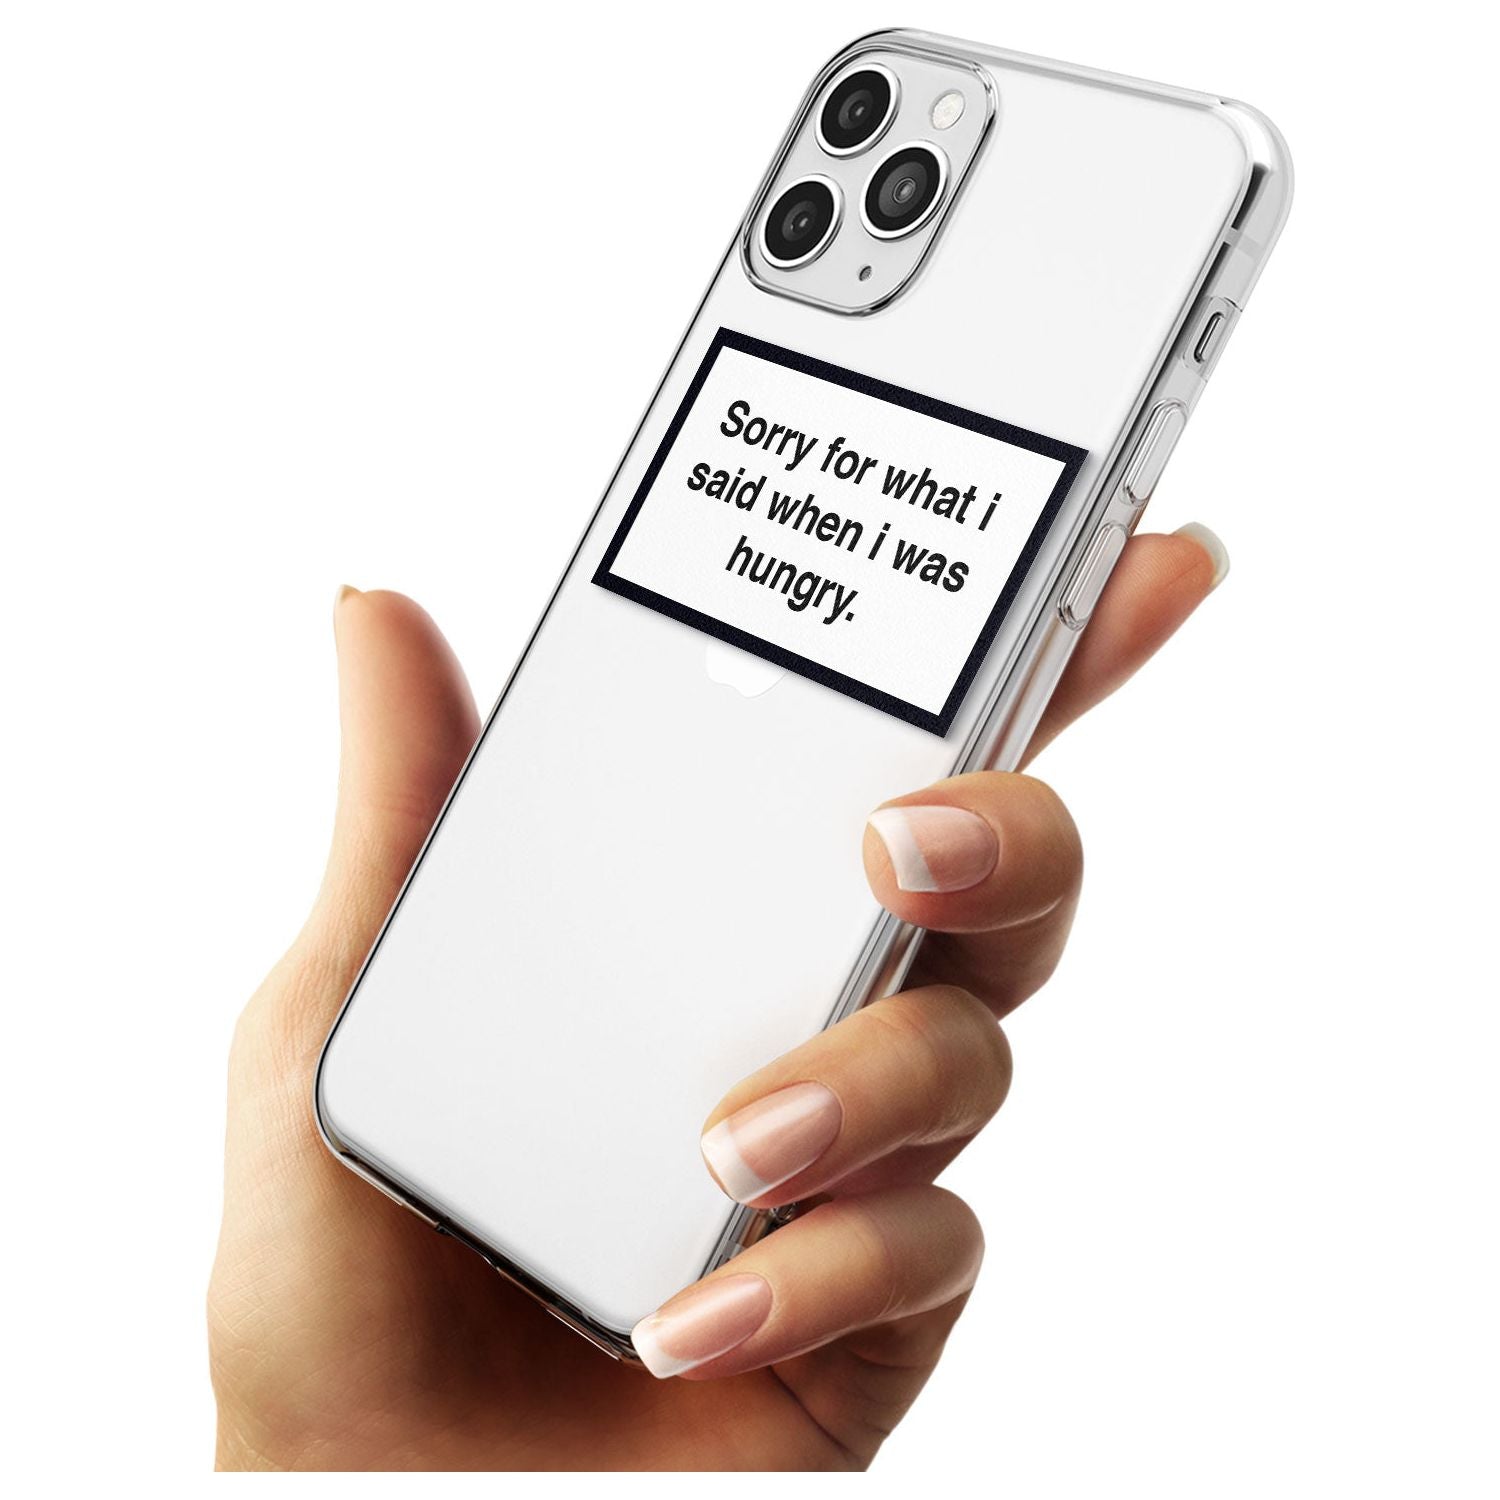 Sorry for what I said iPhone Case   Phone Case - Case Warehouse